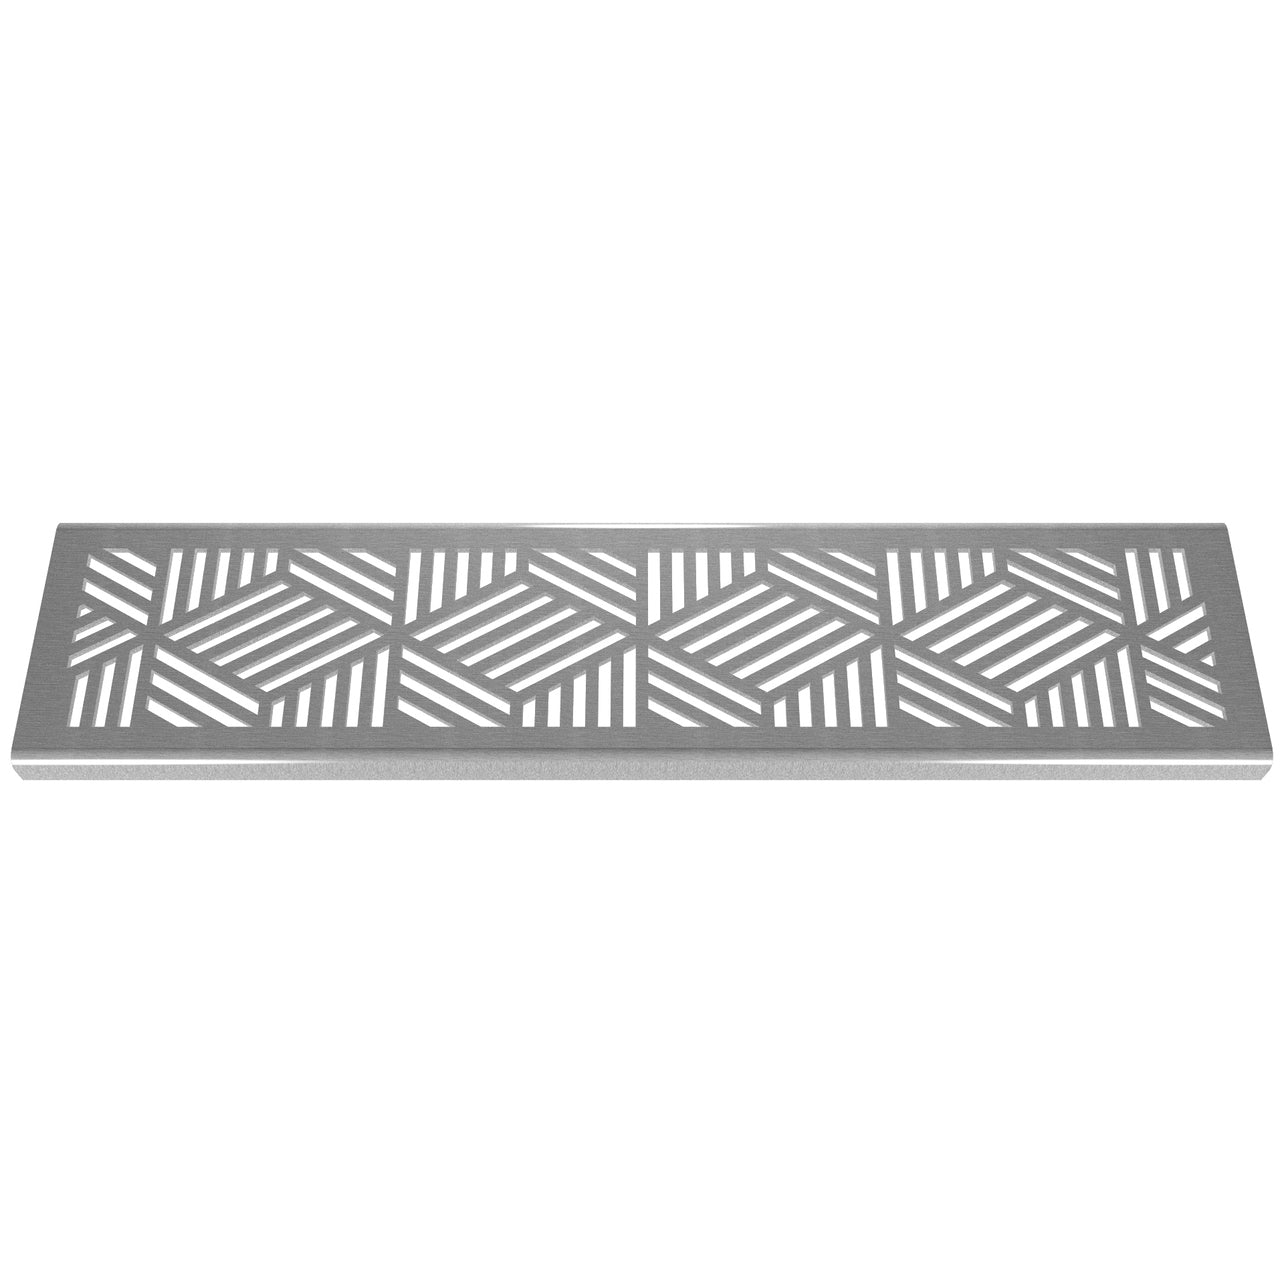 Cubix 304 Stainless Steel Channel Drain Grate 75 x 913mm (3 Inch)